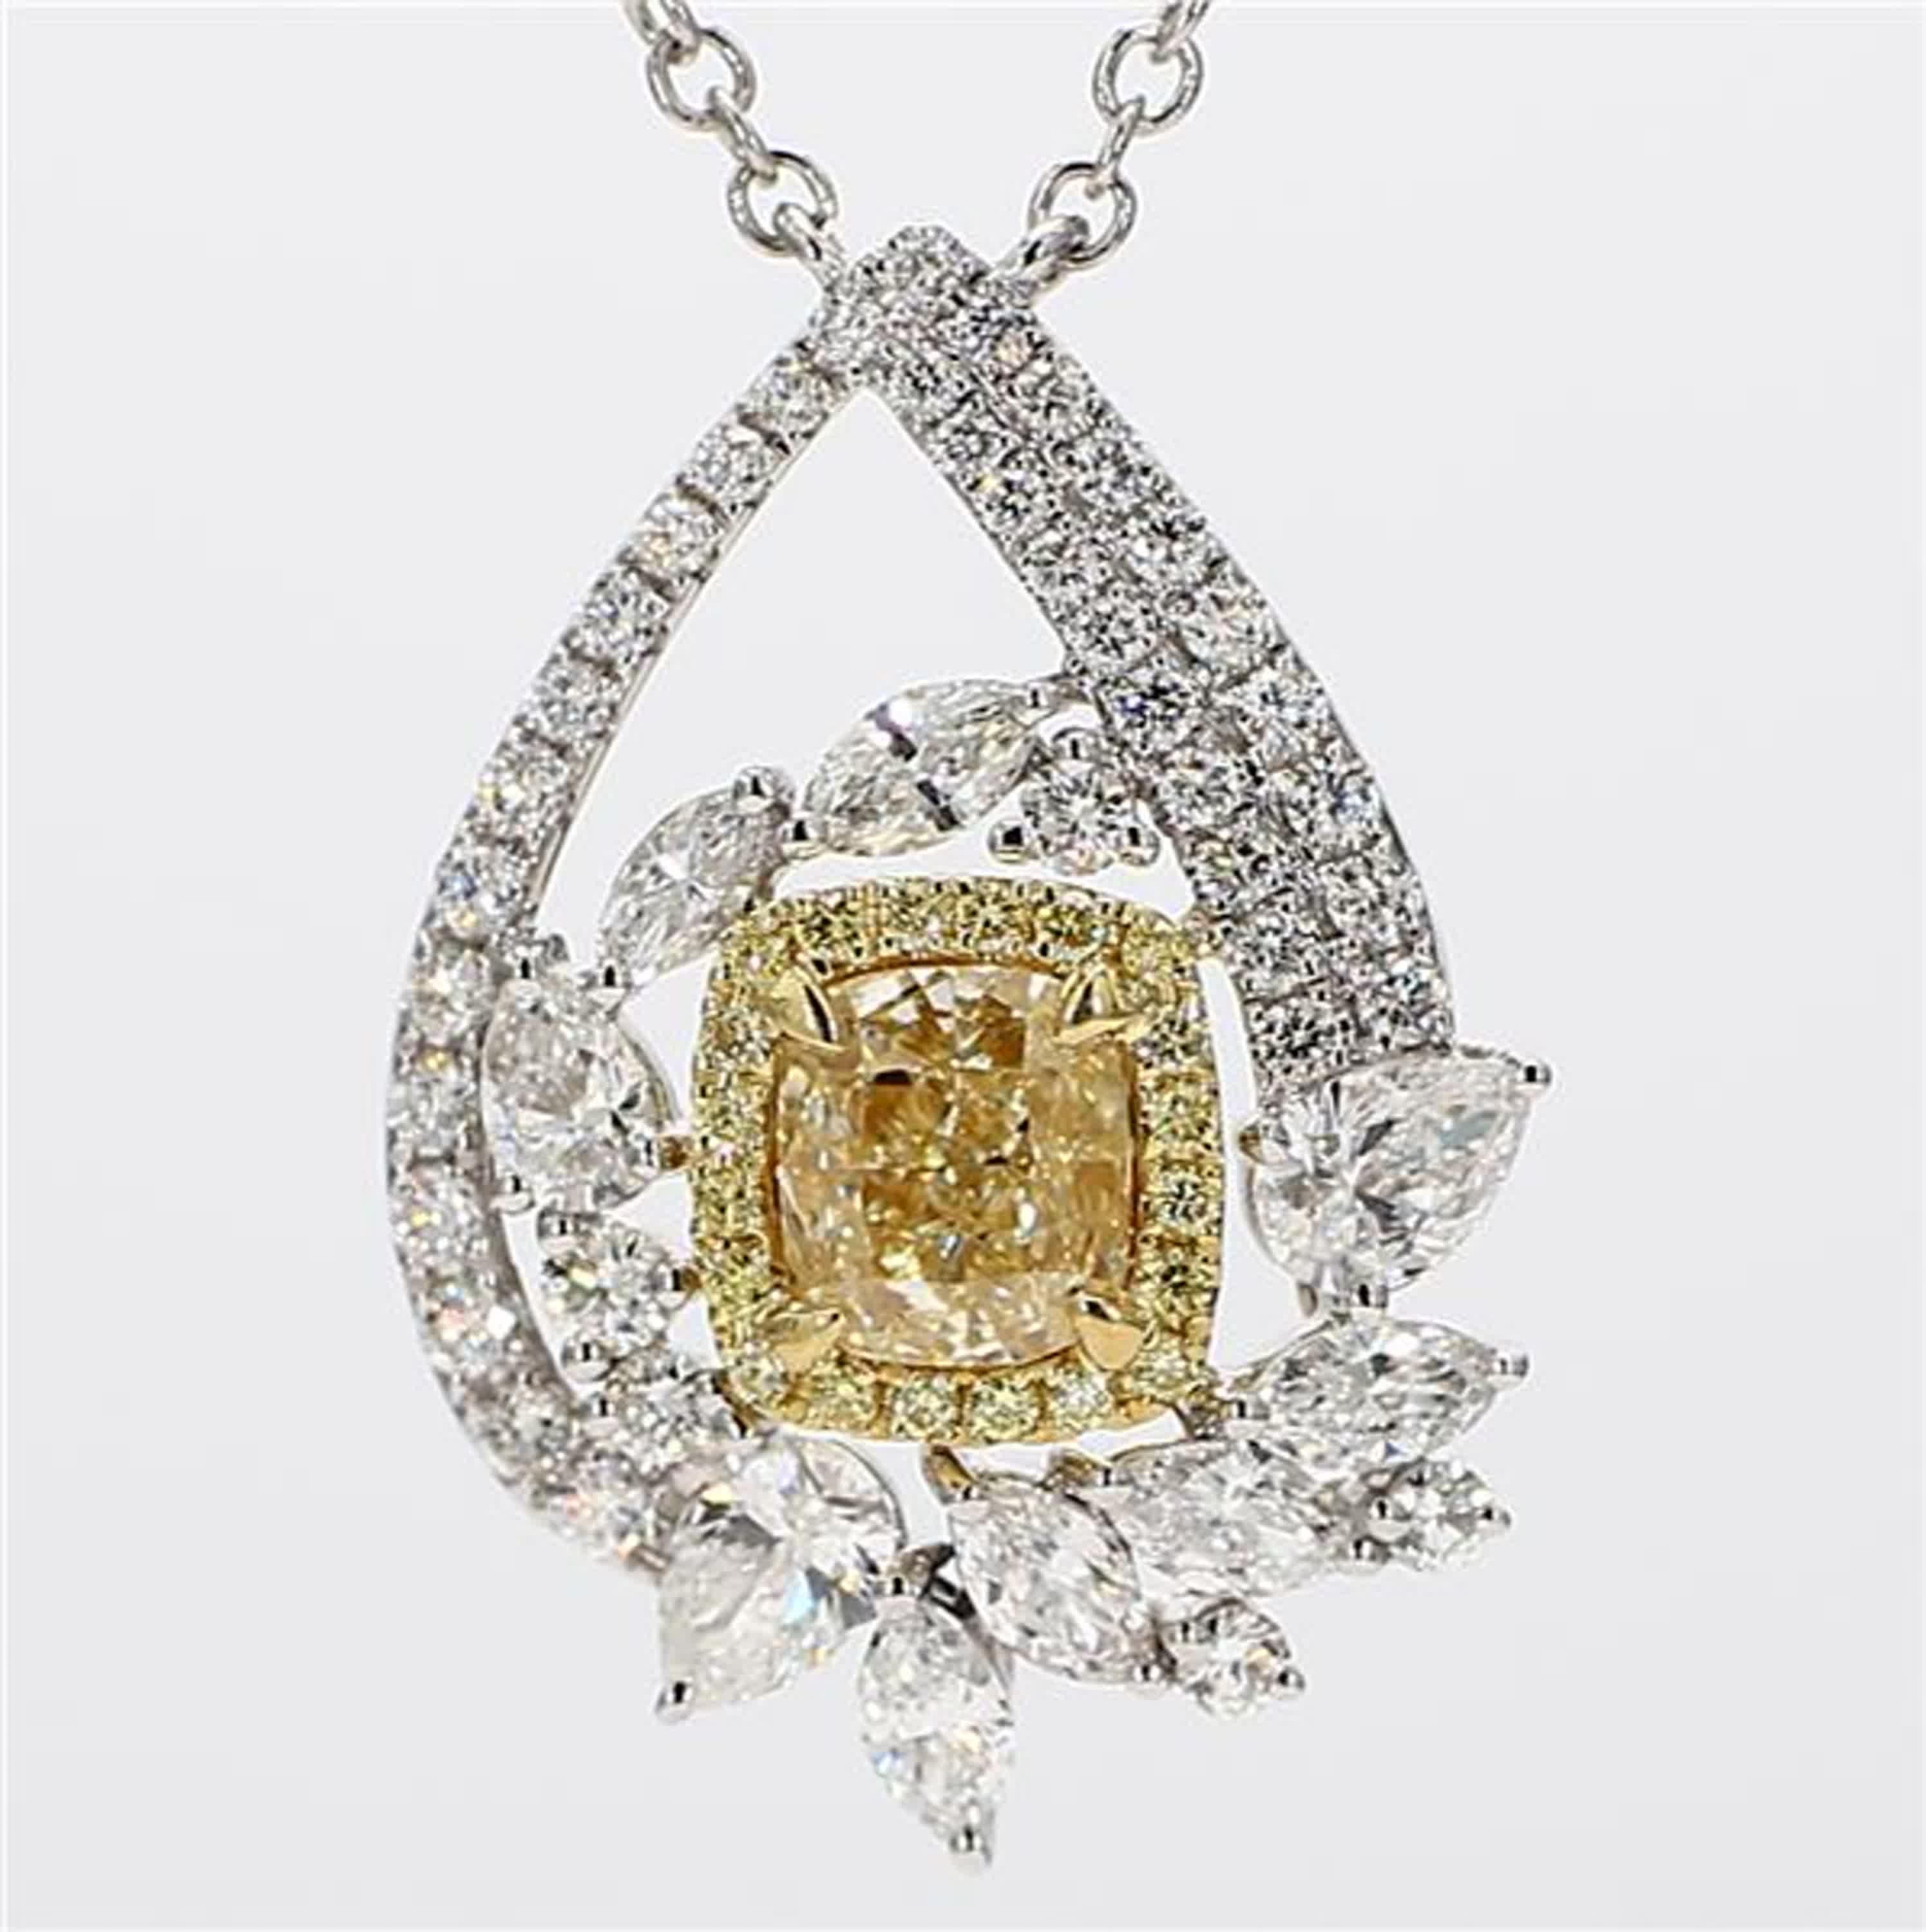 RareGemWorld's intriguing GIA certified diamond necklace. Mounted in a beautiful 18K Yellow and White Gold setting with a natural cushion cut yellow diamond. The yellow diamond is surrounded by natural pear cut white diamonds, natural marquise cut